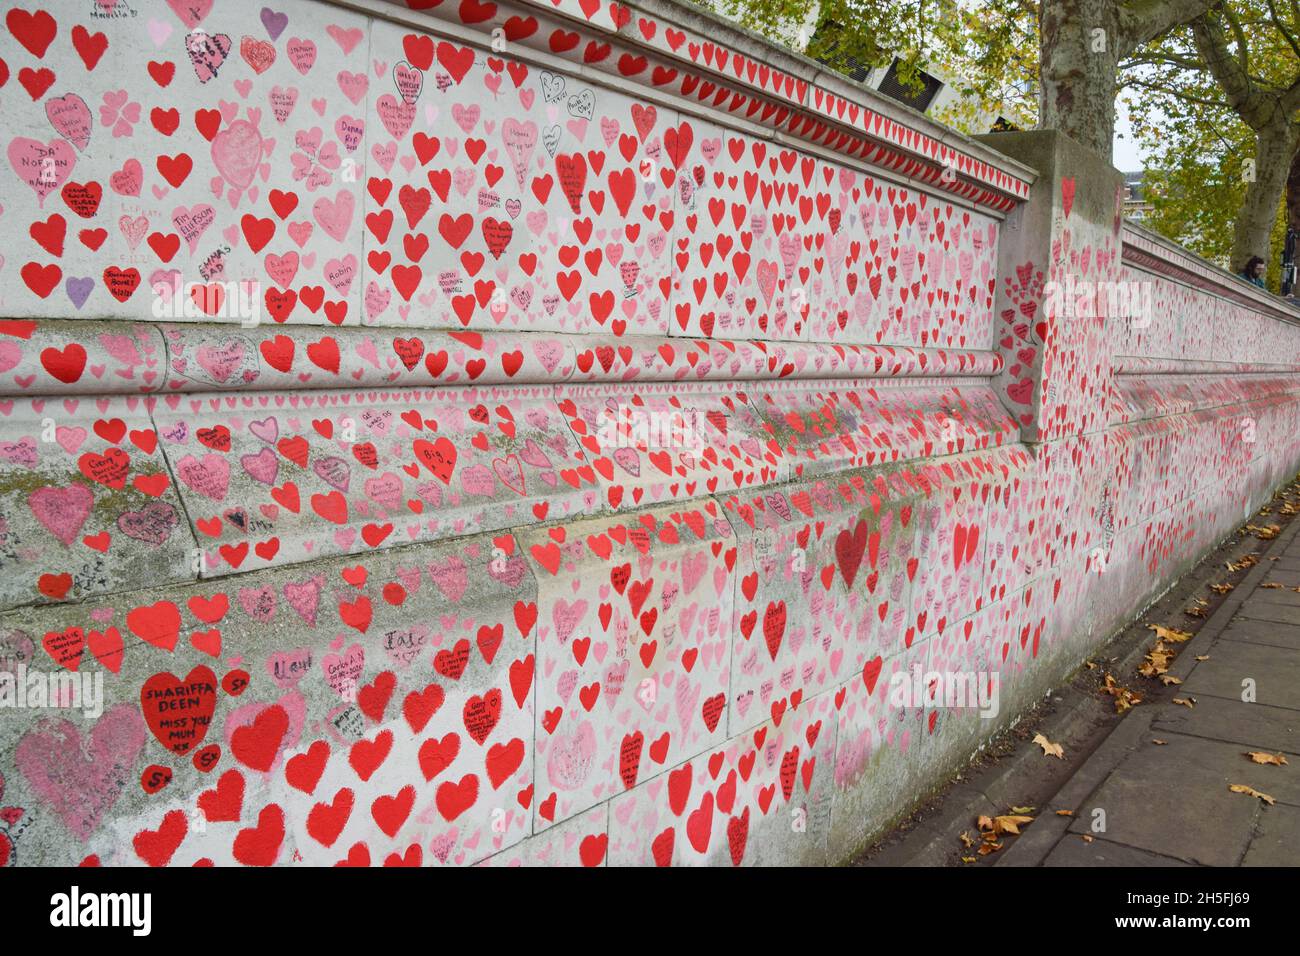 London, UK. 9th November 2021. The National Covid Memorial Wall outside St Thomas' Hospital. Over 150,000 red hearts have been painted by volunteers and members of the public, one for each life lost to Covid in the UK to date. Stock Photo